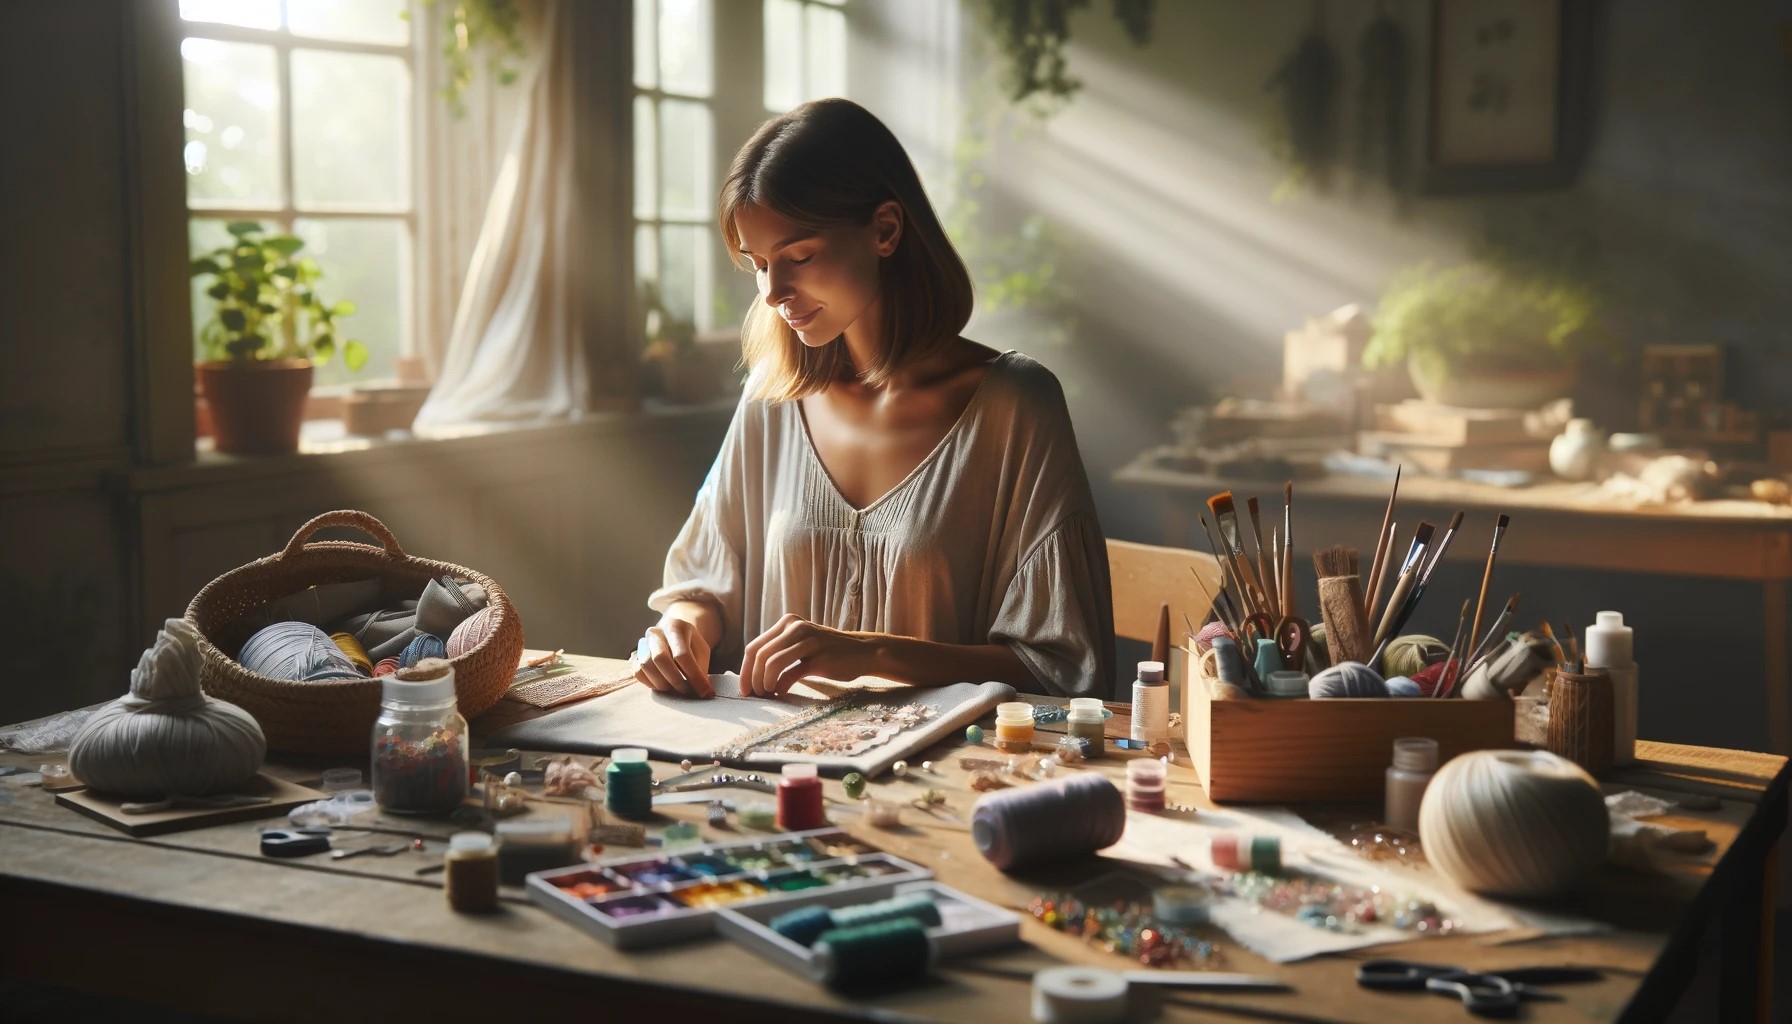 20 DIY Craft Ideas - A serene crafting workspace bathed in natural light. A woman sits at a large table, deeply focused on her crafting project.